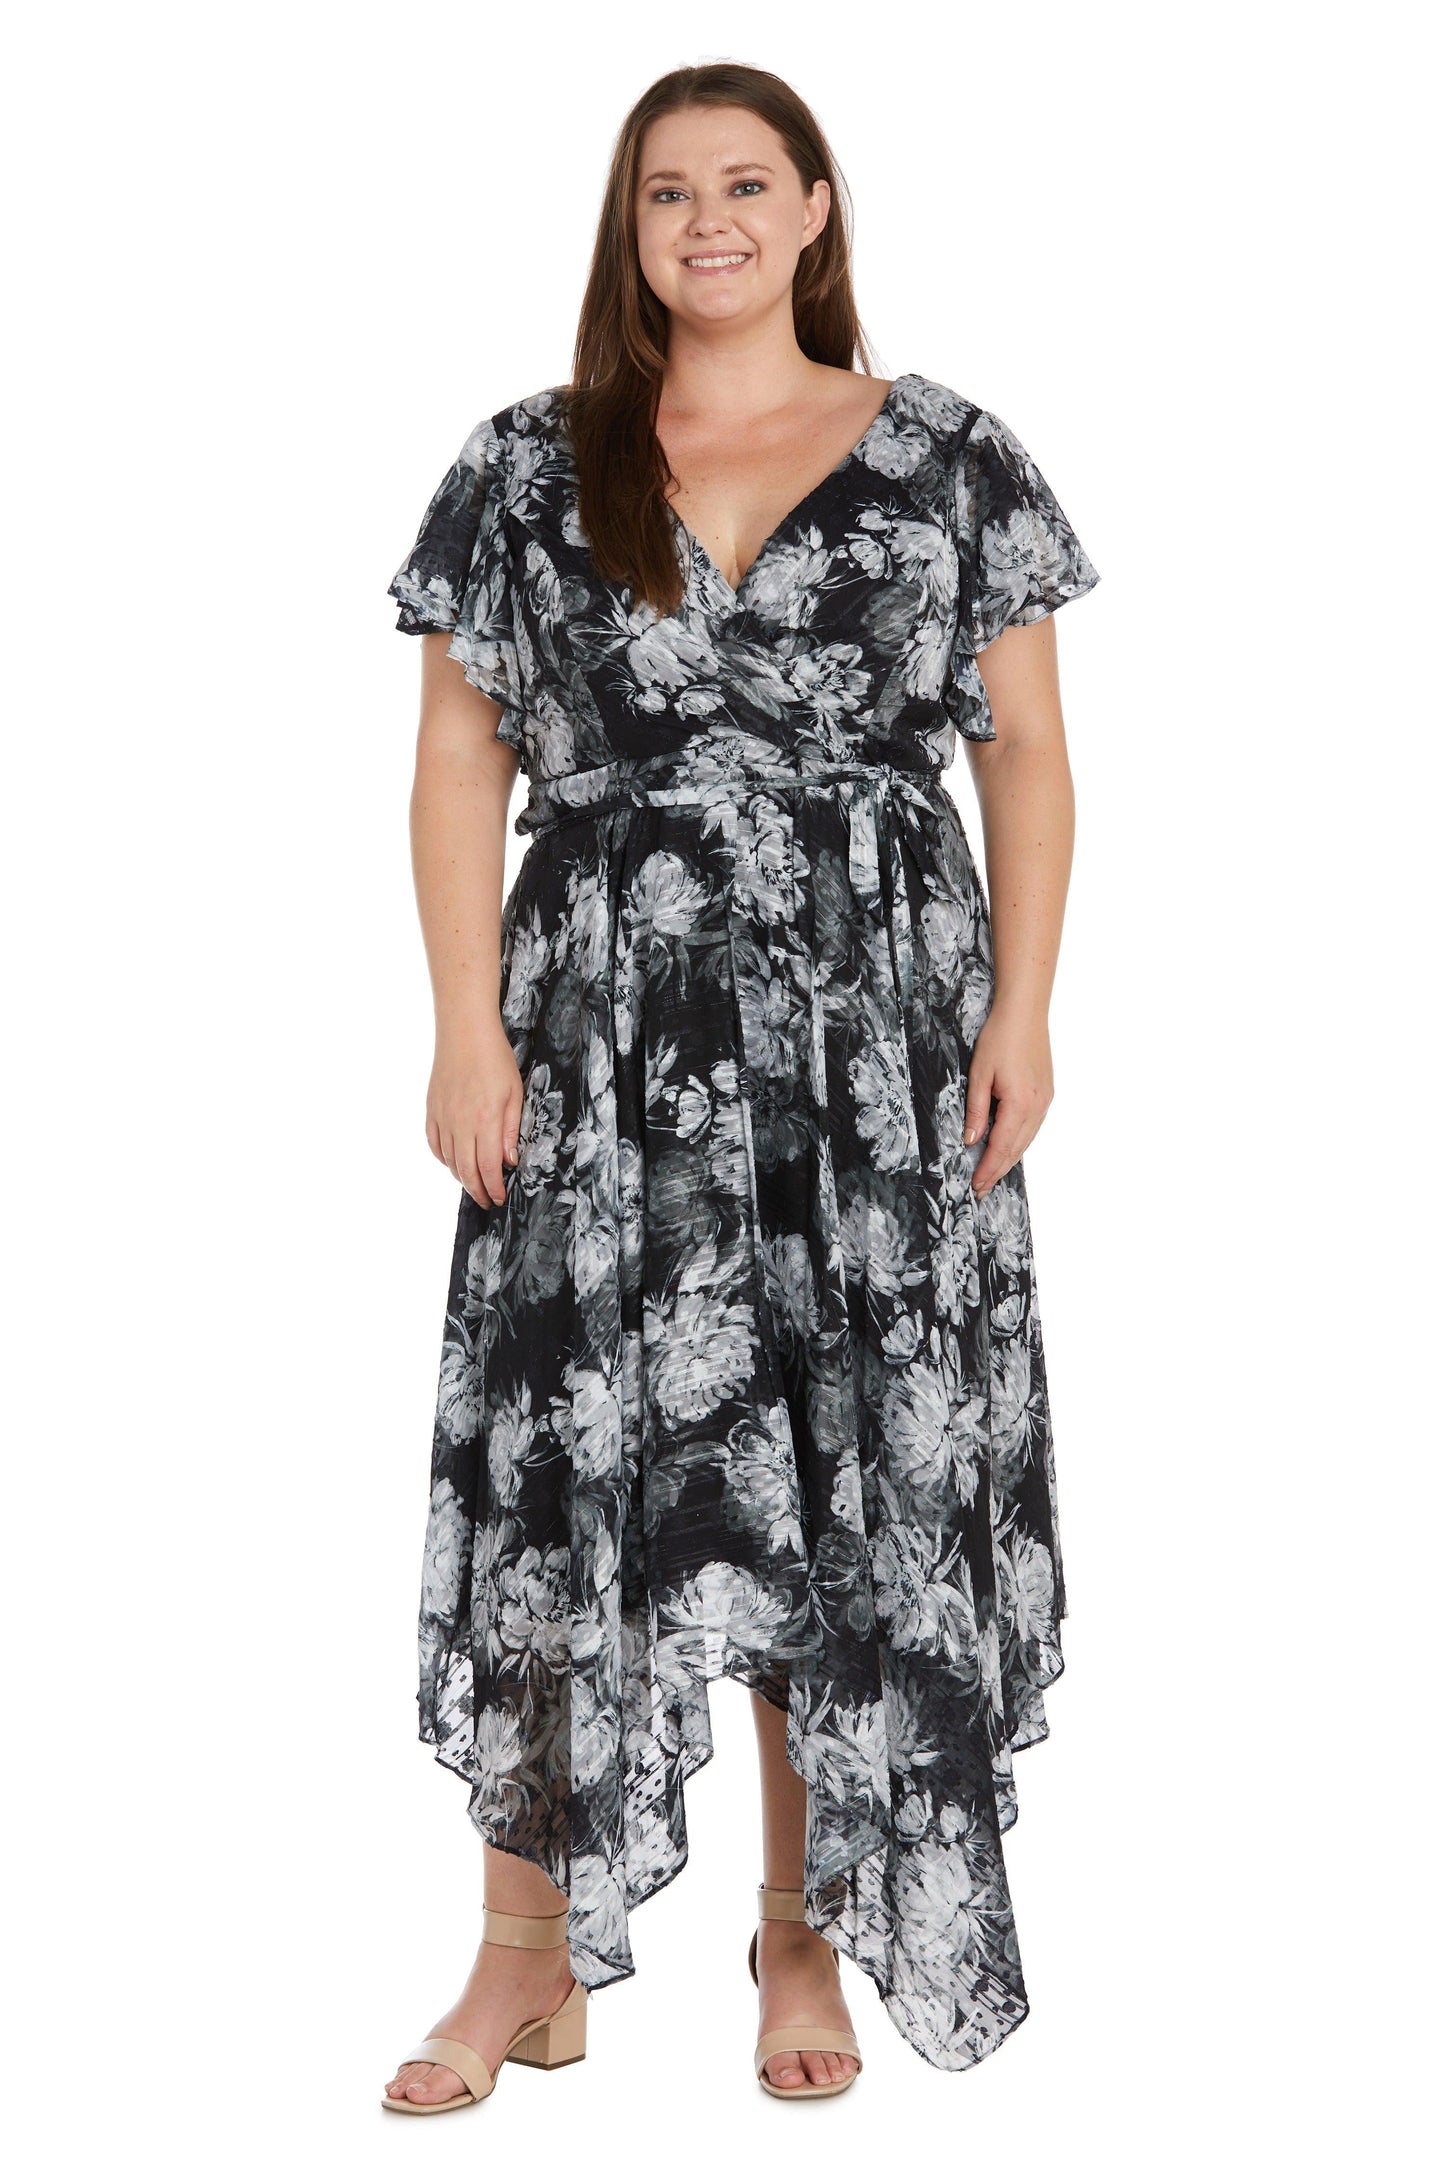 Nightway High Low Plus Size Floral Dress 22163W - The Dress Outlet